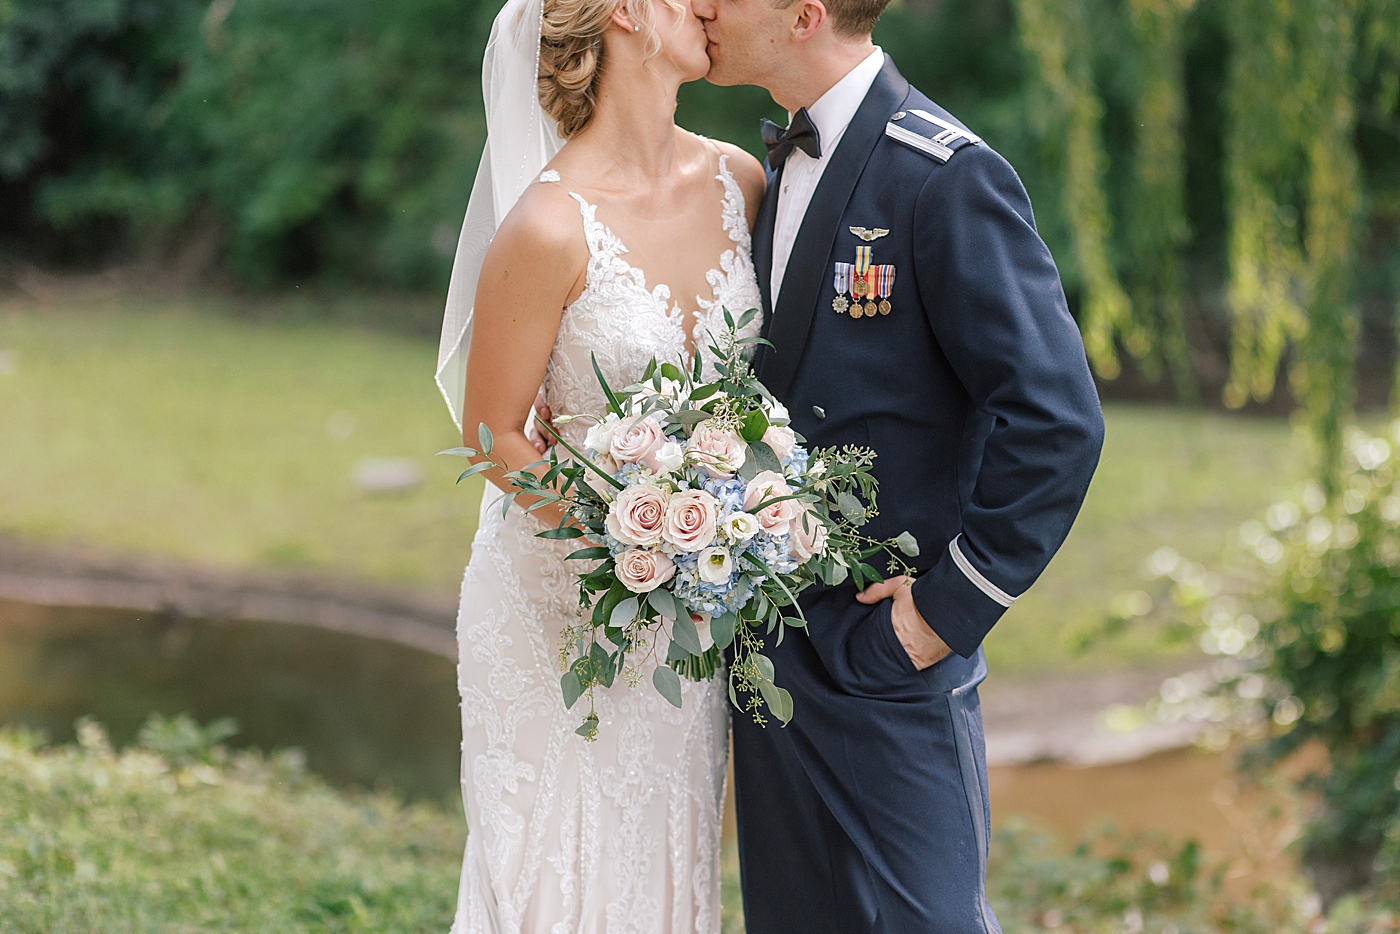 Detail of bride and groom kissing | Image by Hope Helmuth Photography